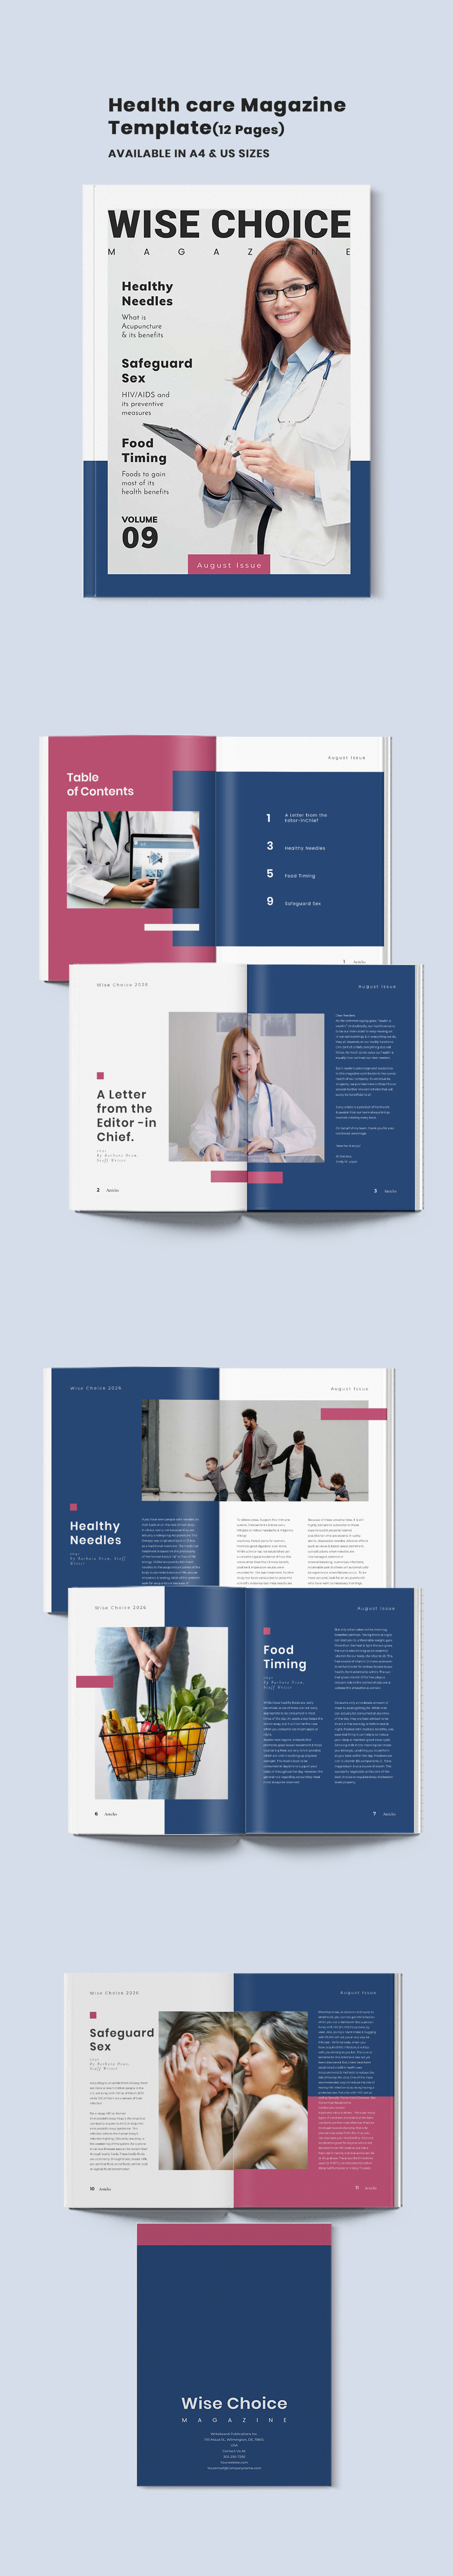 Health and Medical Magazine Template - InDesign, Word, Apple Pages, PSD ...